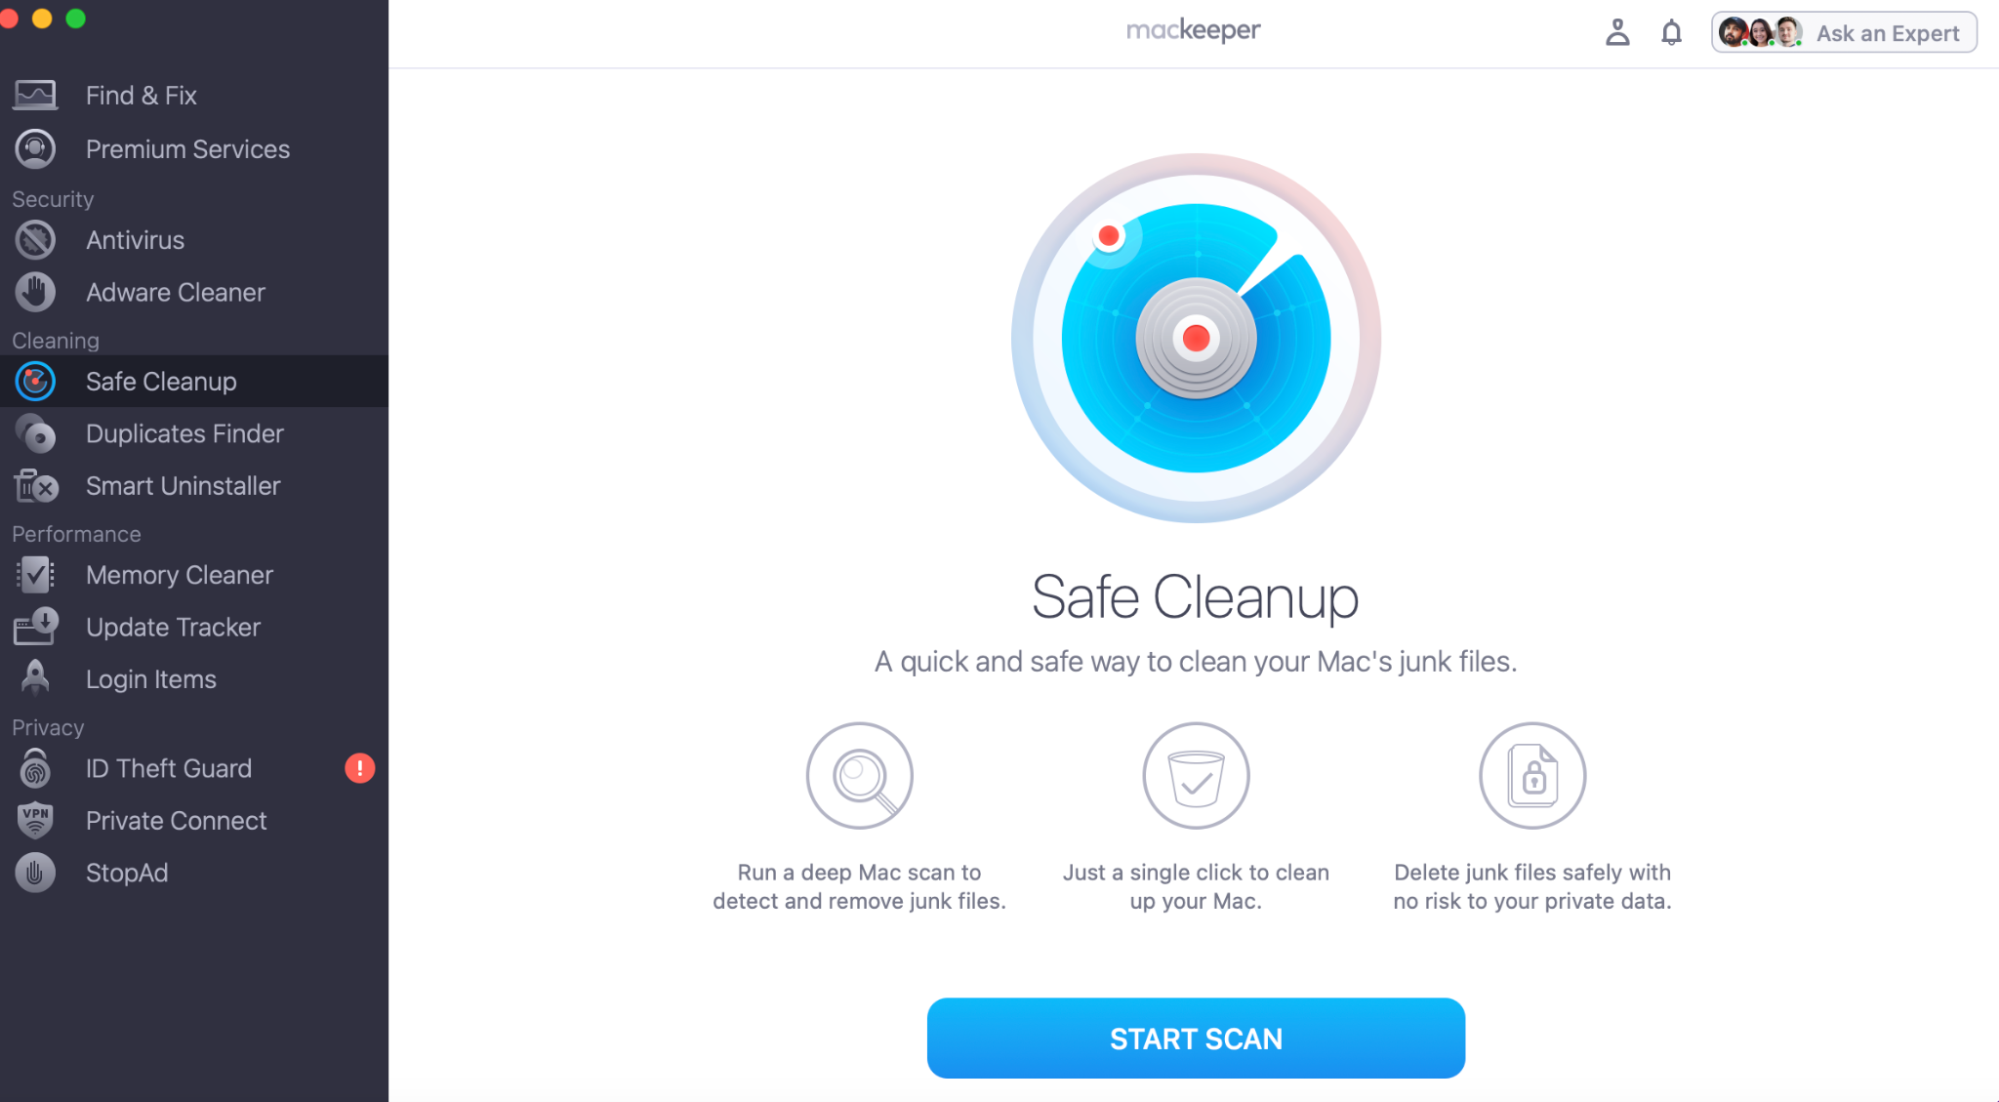 The second method you can apply to clear Safari cache is by using a third-party app like MacKeeper. All you need to do is download and open MacKeeper and select the Safe Cleanup tool. Then click the Start Scan button.